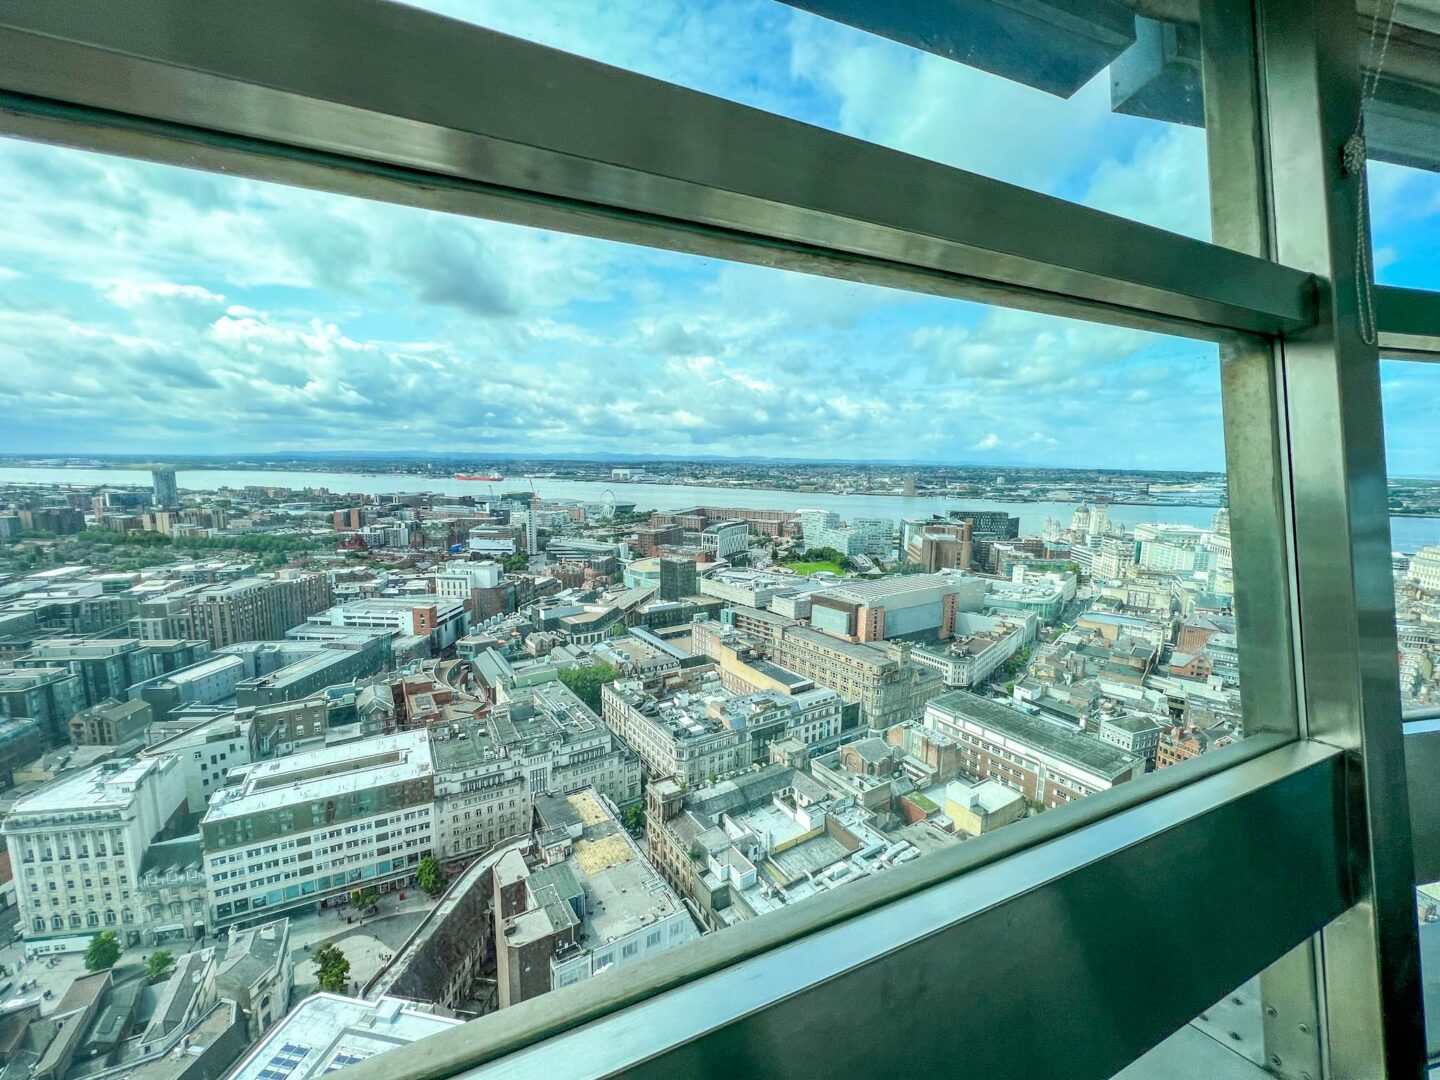 One day in Liverpool, view from St Johns Beacon Tower over Liverpool